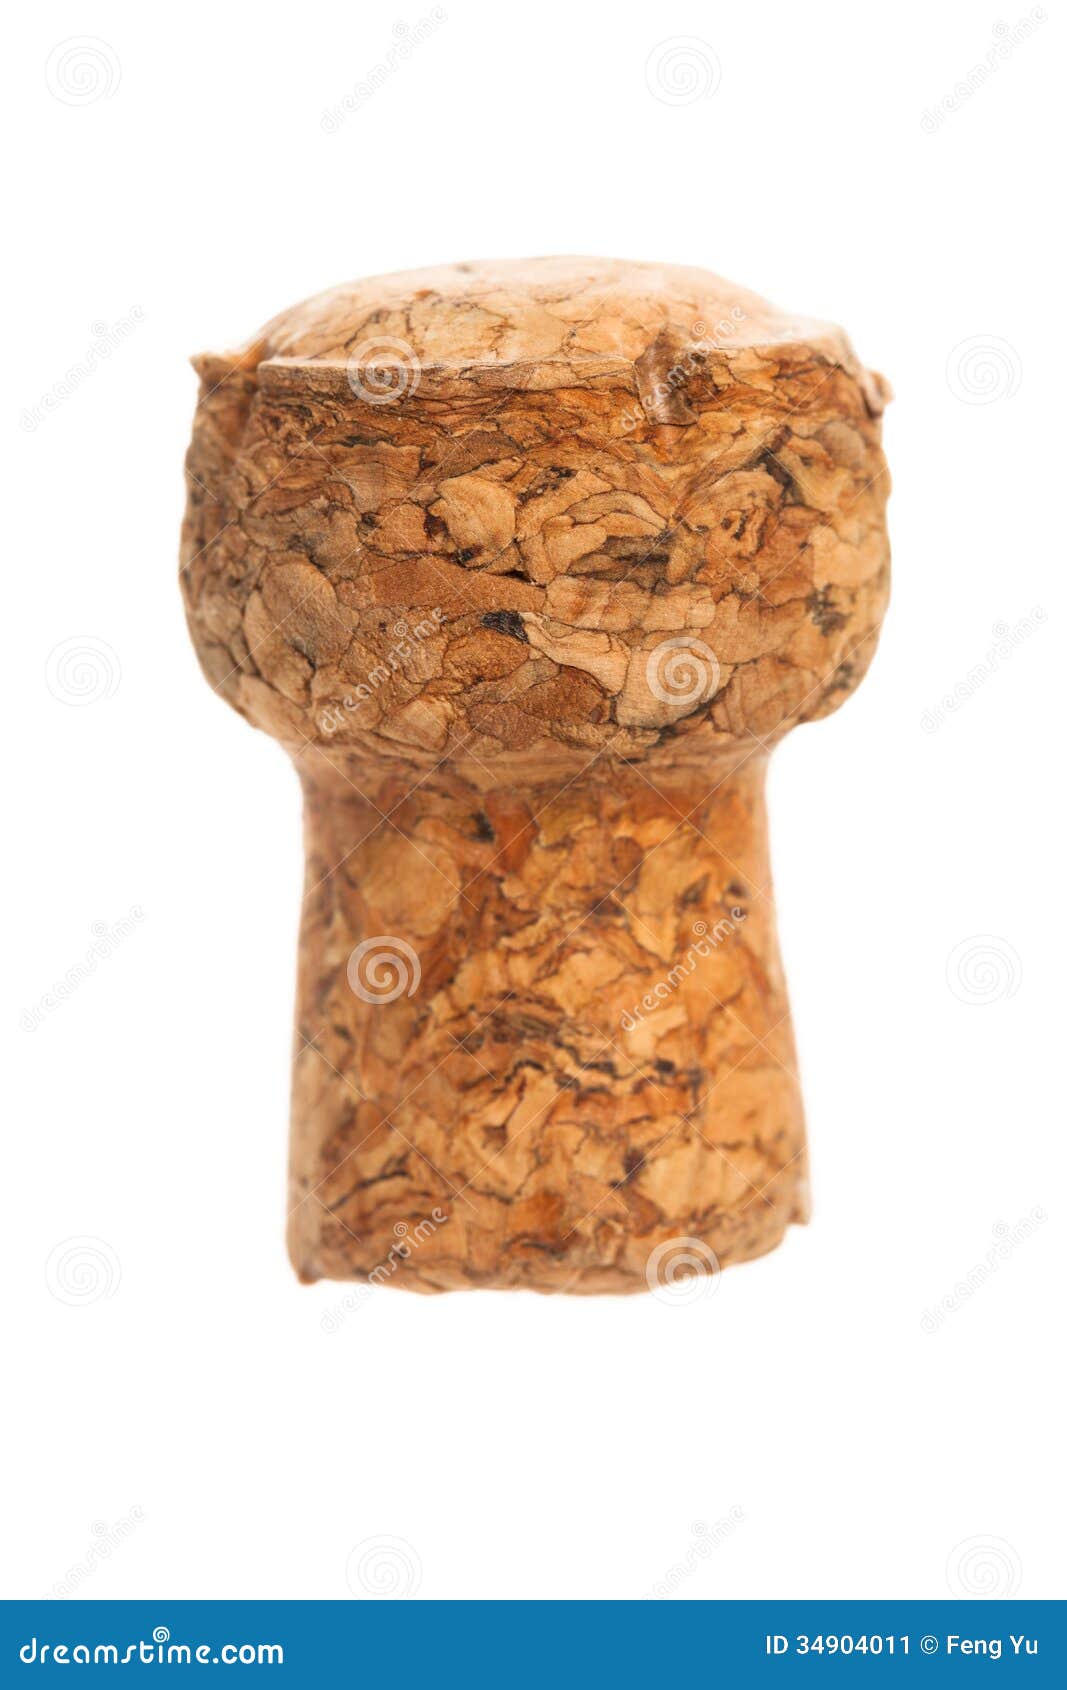 Champagne cork stock image. Image of background, object - 34904011